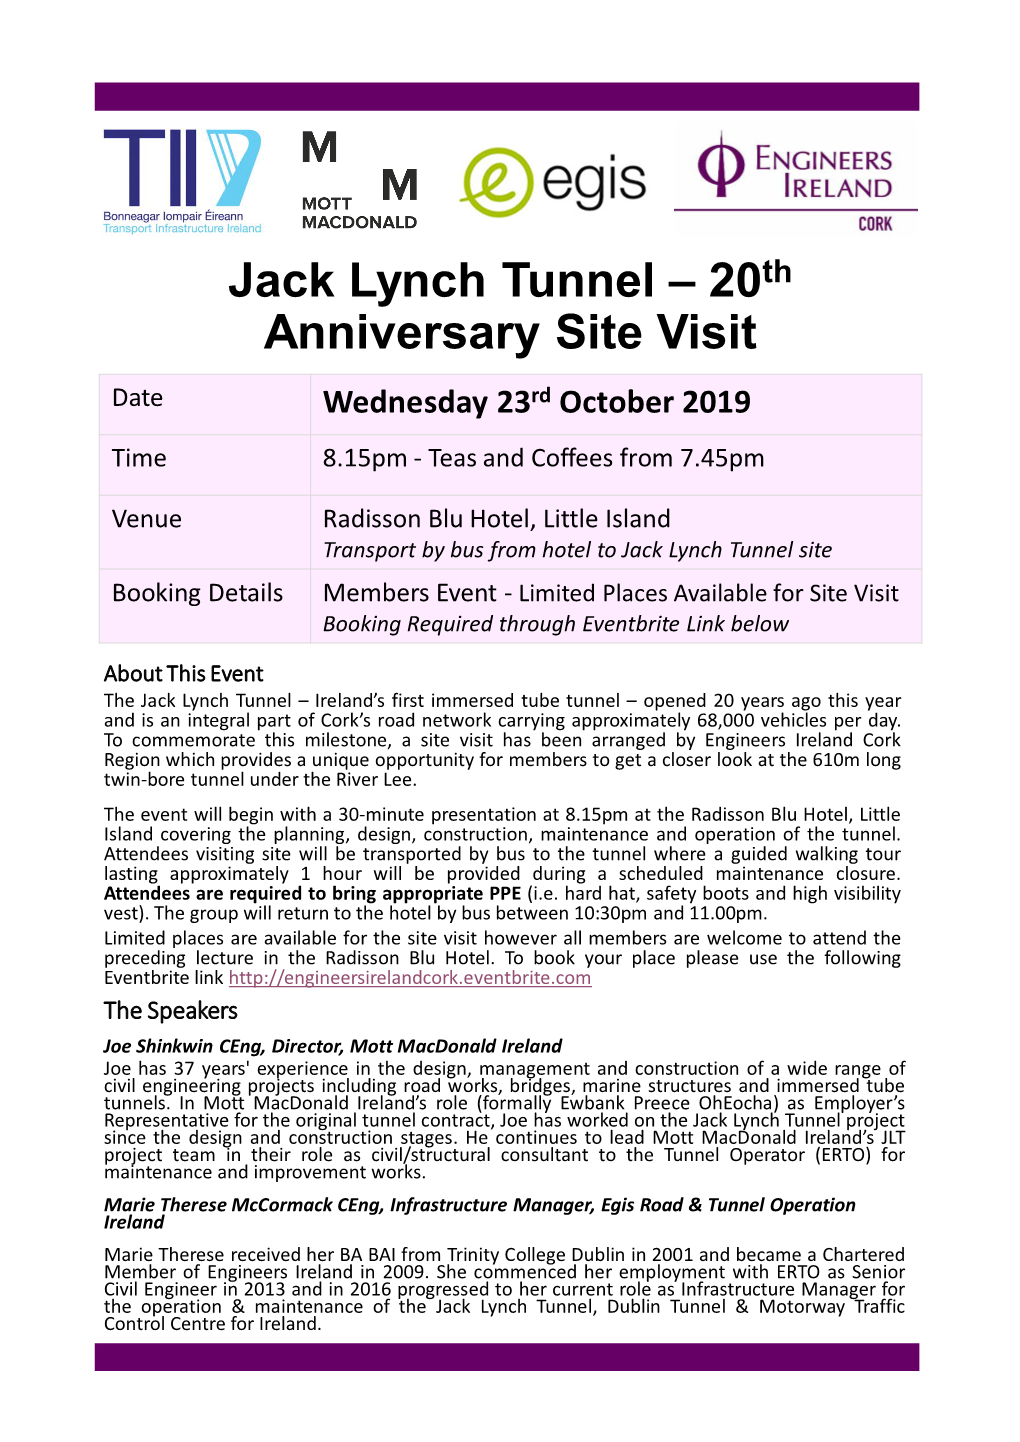 Jack Lynch Tunnel – 20Th Anniversary Site Visit Date Wednesday 23Rd October 2019 Time 8.15Pm - Teas and Coffees from 7.45Pm